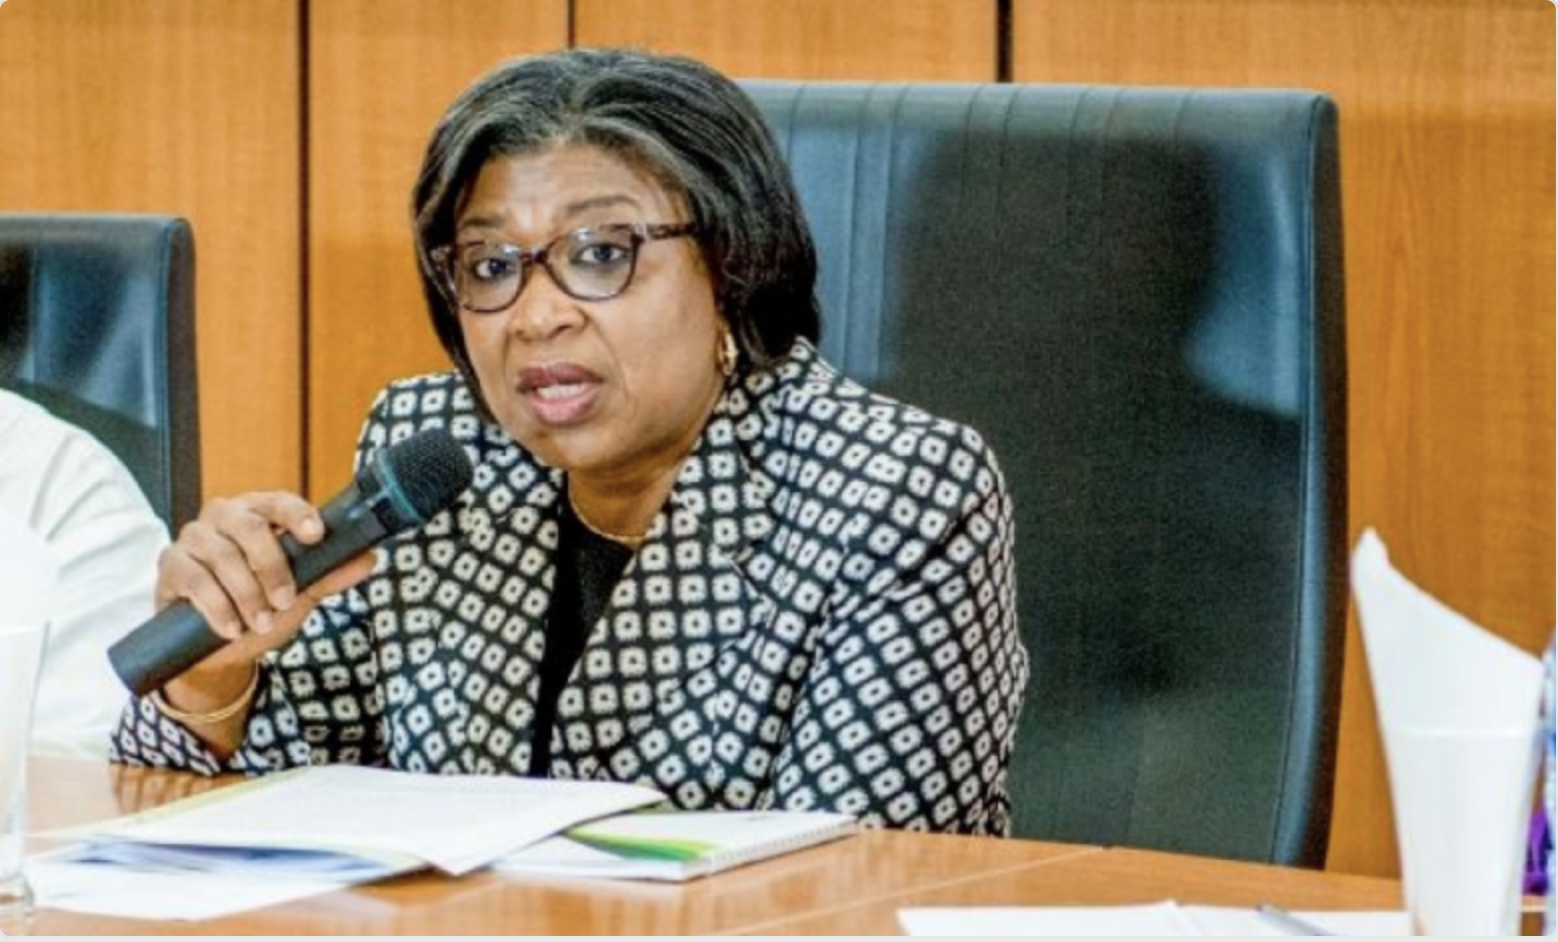 Subscriptions For FGN Bonds Rose From N100 Million To Over N1 Billion In Months - DMO